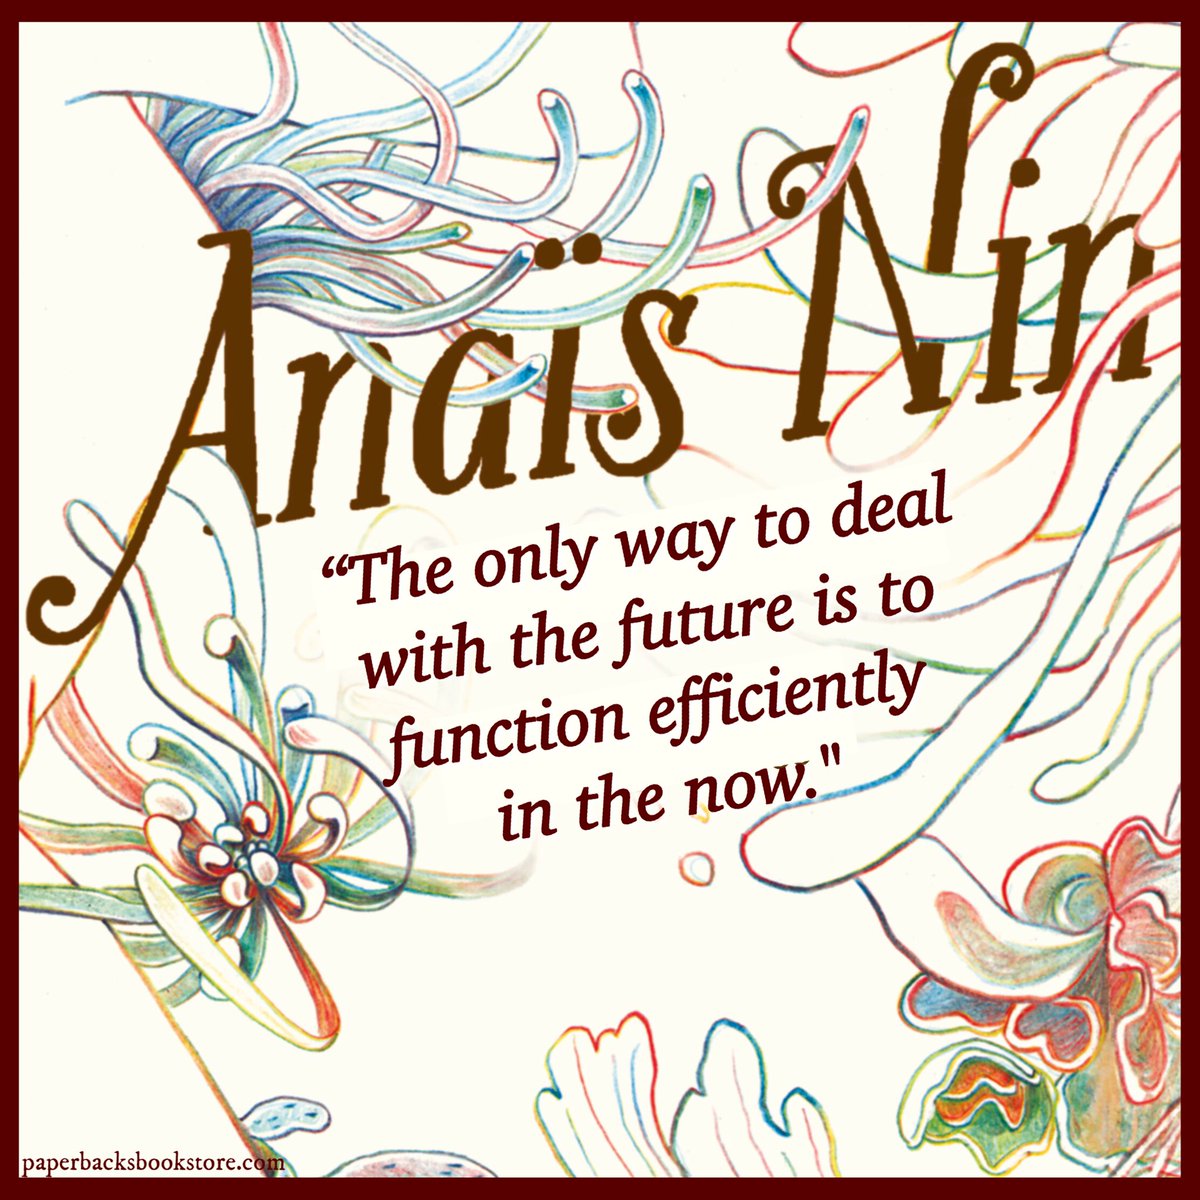 🌾
'The only way to deal with the future is to function efficiently in the now.' ~Anais Nin

#thefuture #functionefficiently #hereandnow #AnaisNin #books #bookart #literaryart #booklovers #booklover  #readers #reader #bookobsessed #literacy #literary #lifeadvice #goodadvice